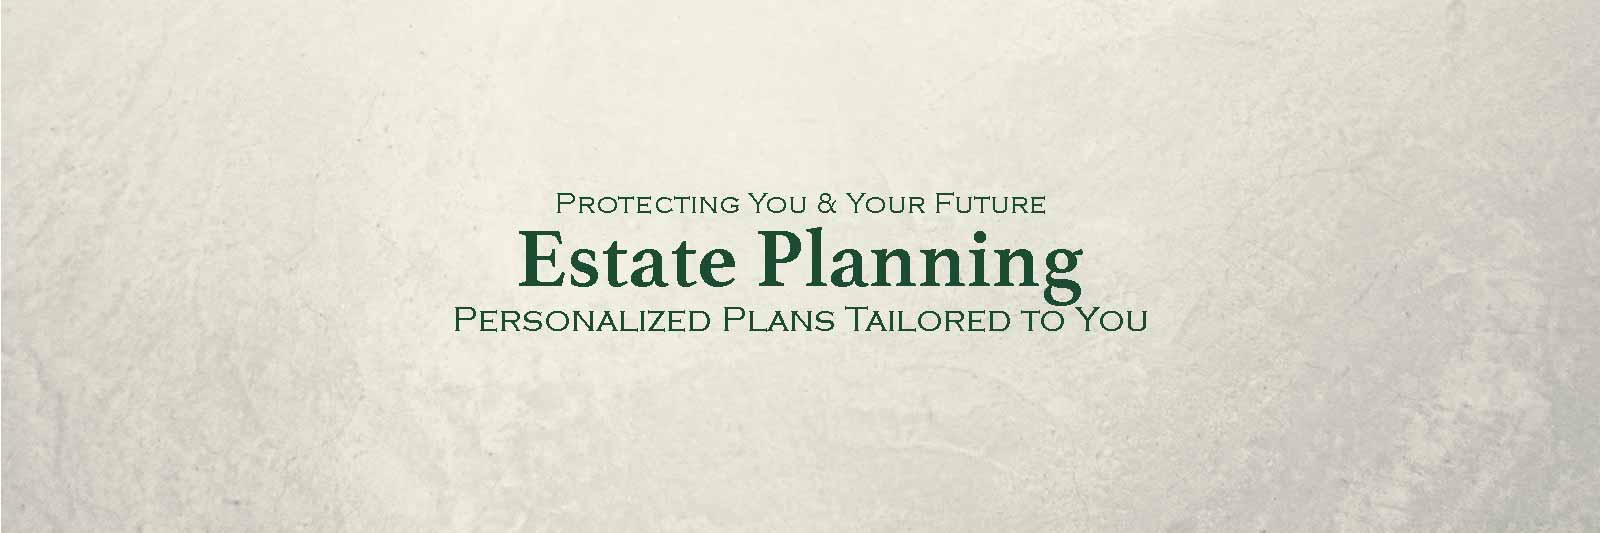 Protecting You & Your Future: Estate Planning Personalized Plans Tailored to You